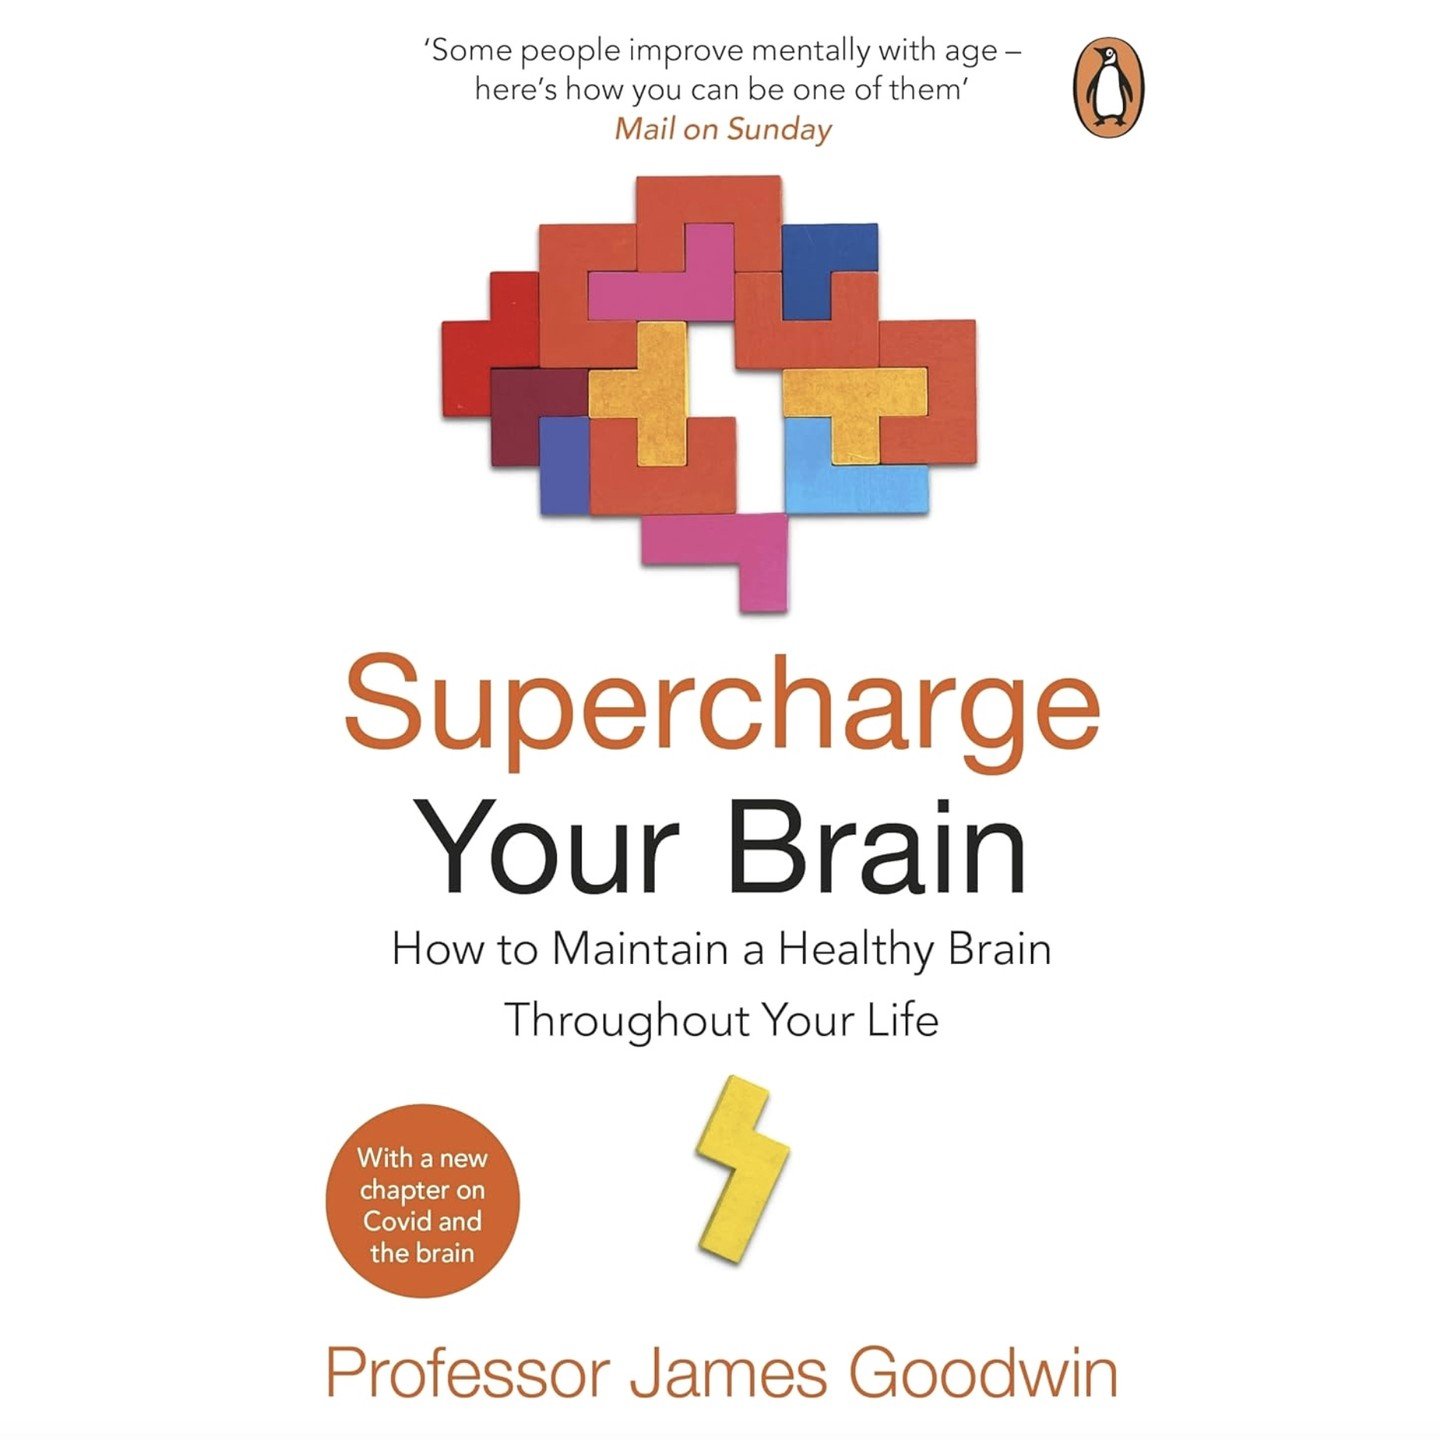 🧠 SUPERCHARGE YOUR BRAIN!
Receive a signed copy of this life-changing book at our Optimising Brain Health Seminar &amp; Luncheon at the Fairmont Monte Carlo on Wednesday 19th June 2024! @brainhealthnetwork 

OPTIMISING BRAIN HEALTH - SEMINAR &amp; L